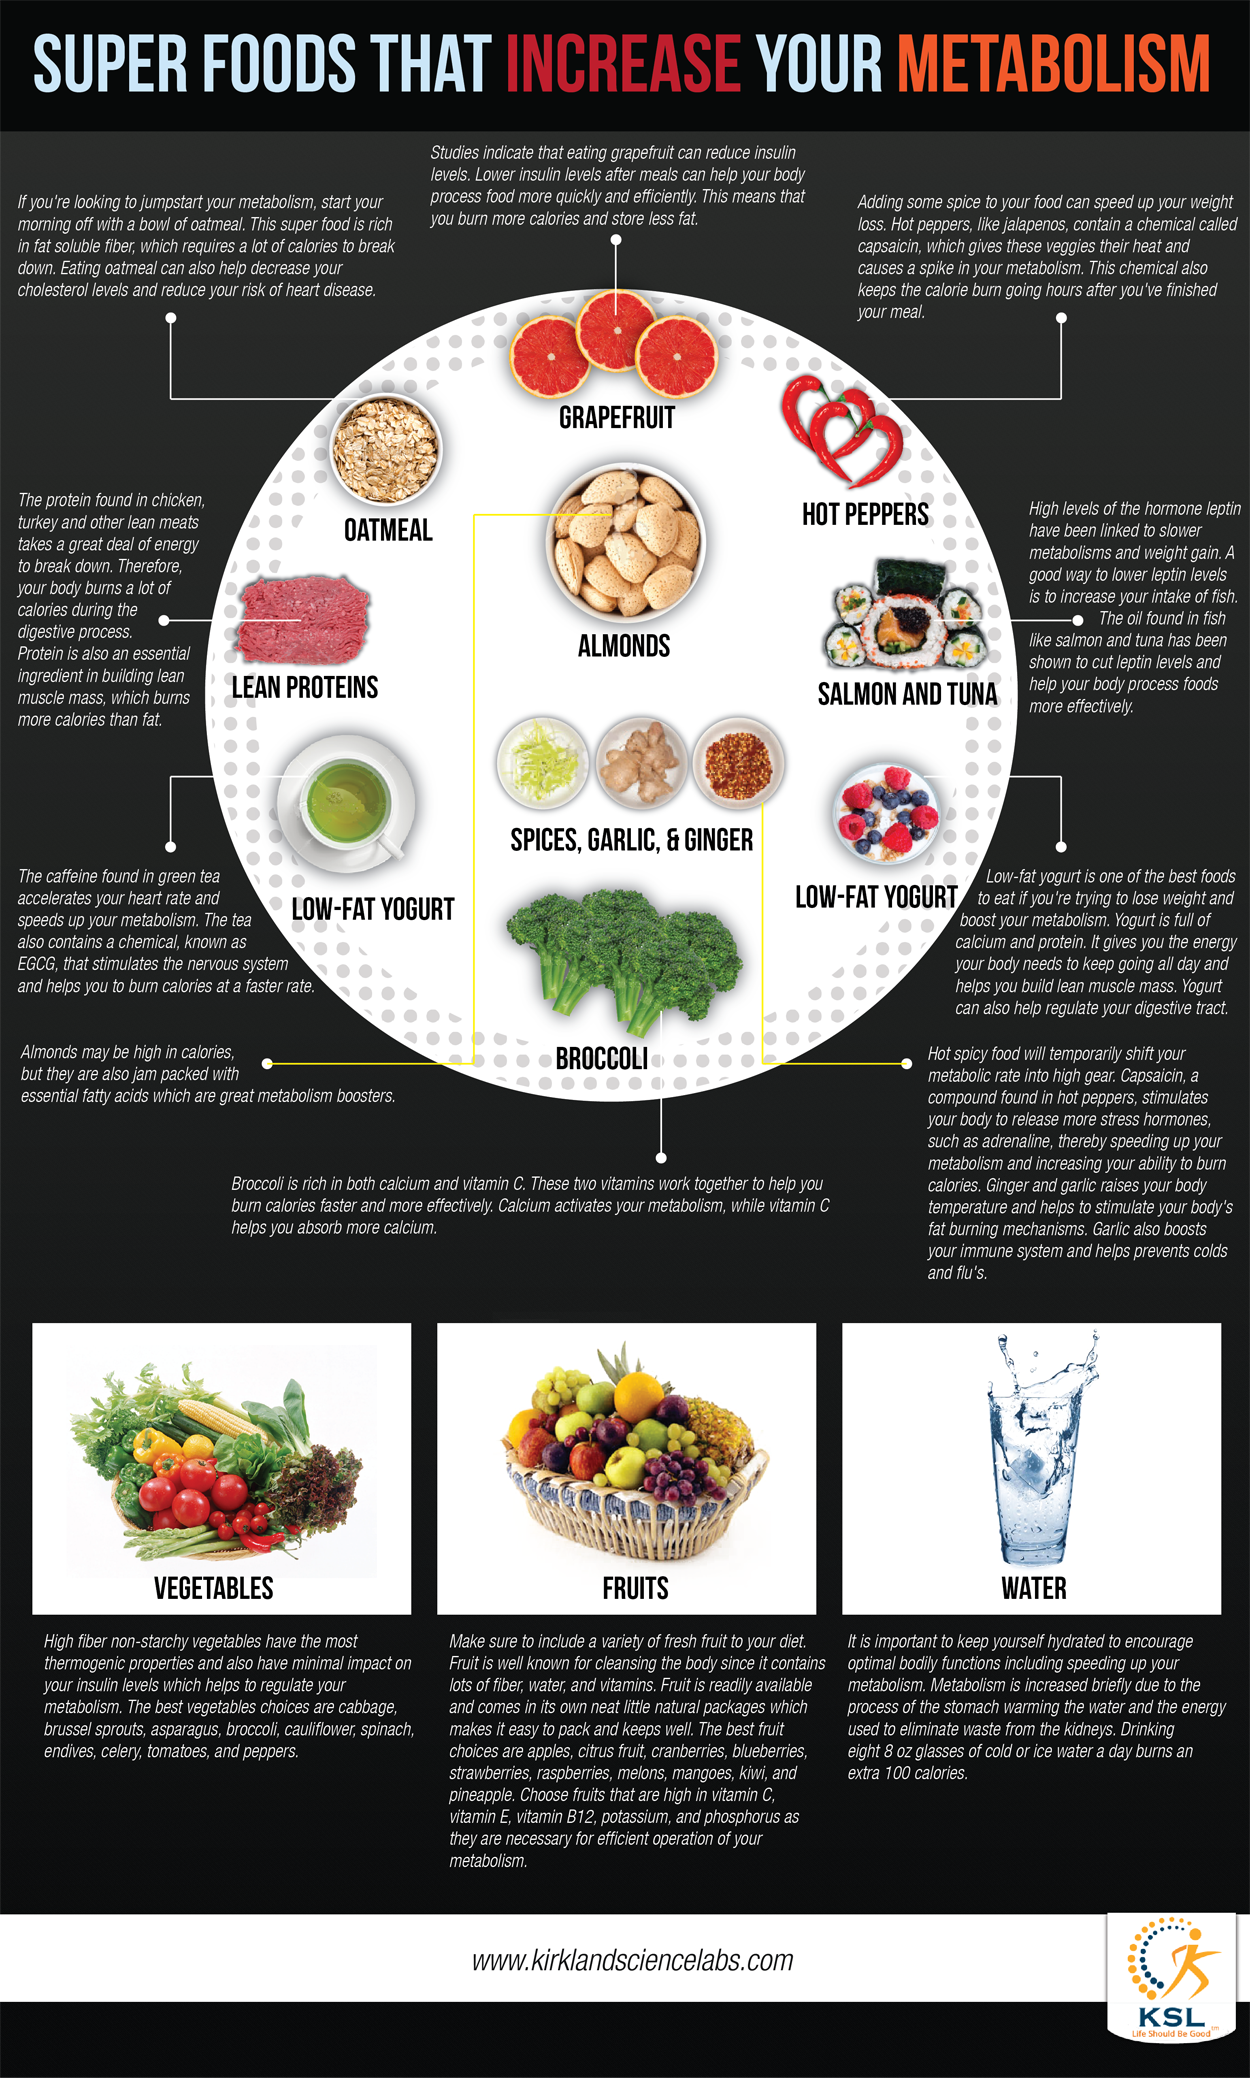 Foods metabolized rapidly